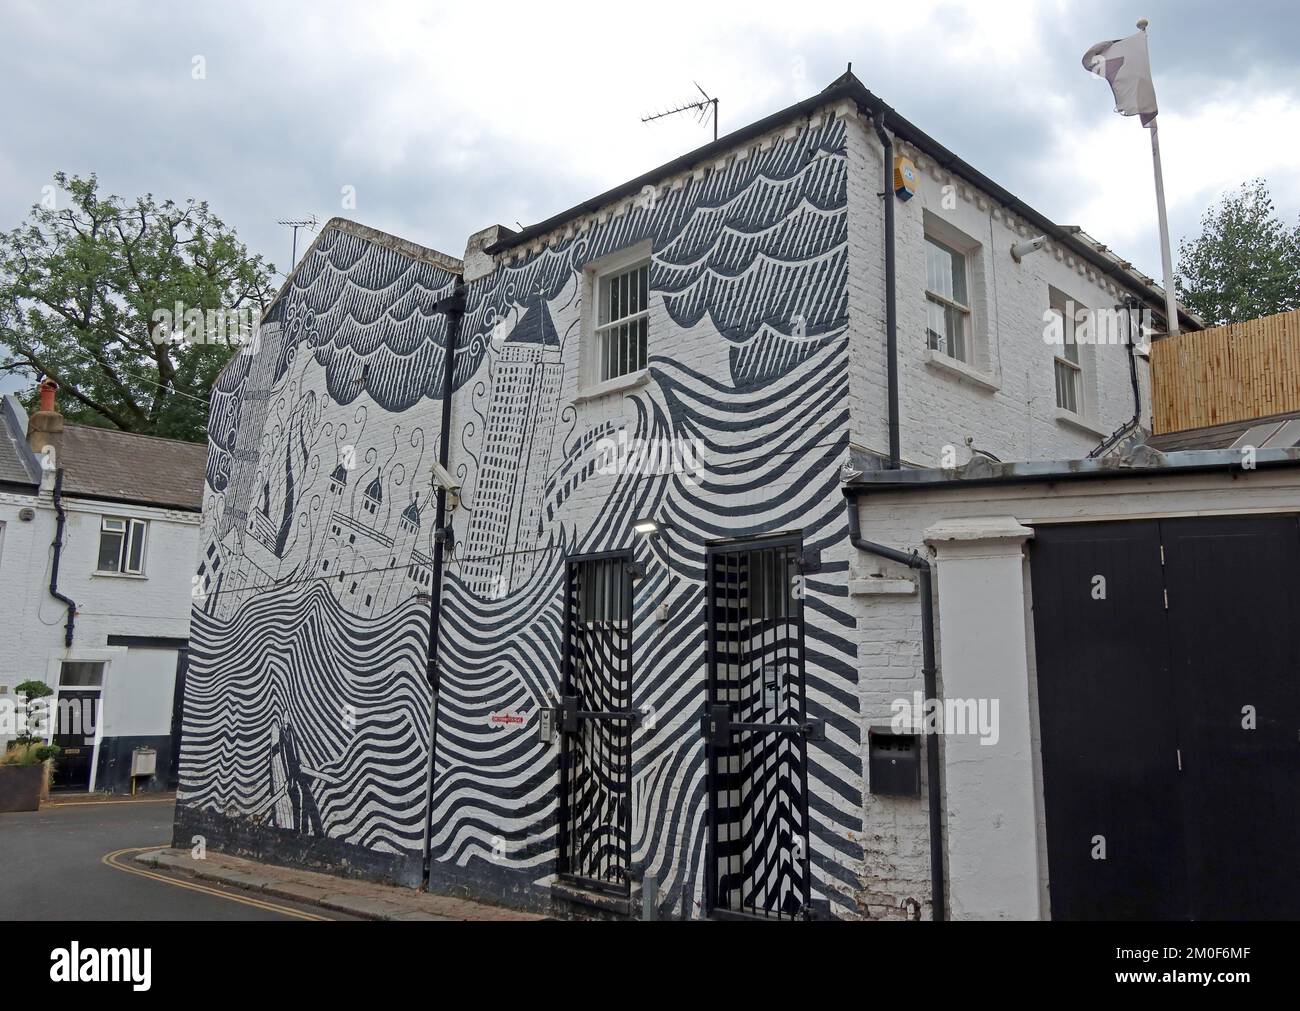 Enregistrements XL, œuvres de Thom York de Radiohead, The Gomer on murals of One Codlington Mews, Notting Hill, RBKC, Londres, Angleterre, Royaume-Uni, W11 2EH Banque D'Images